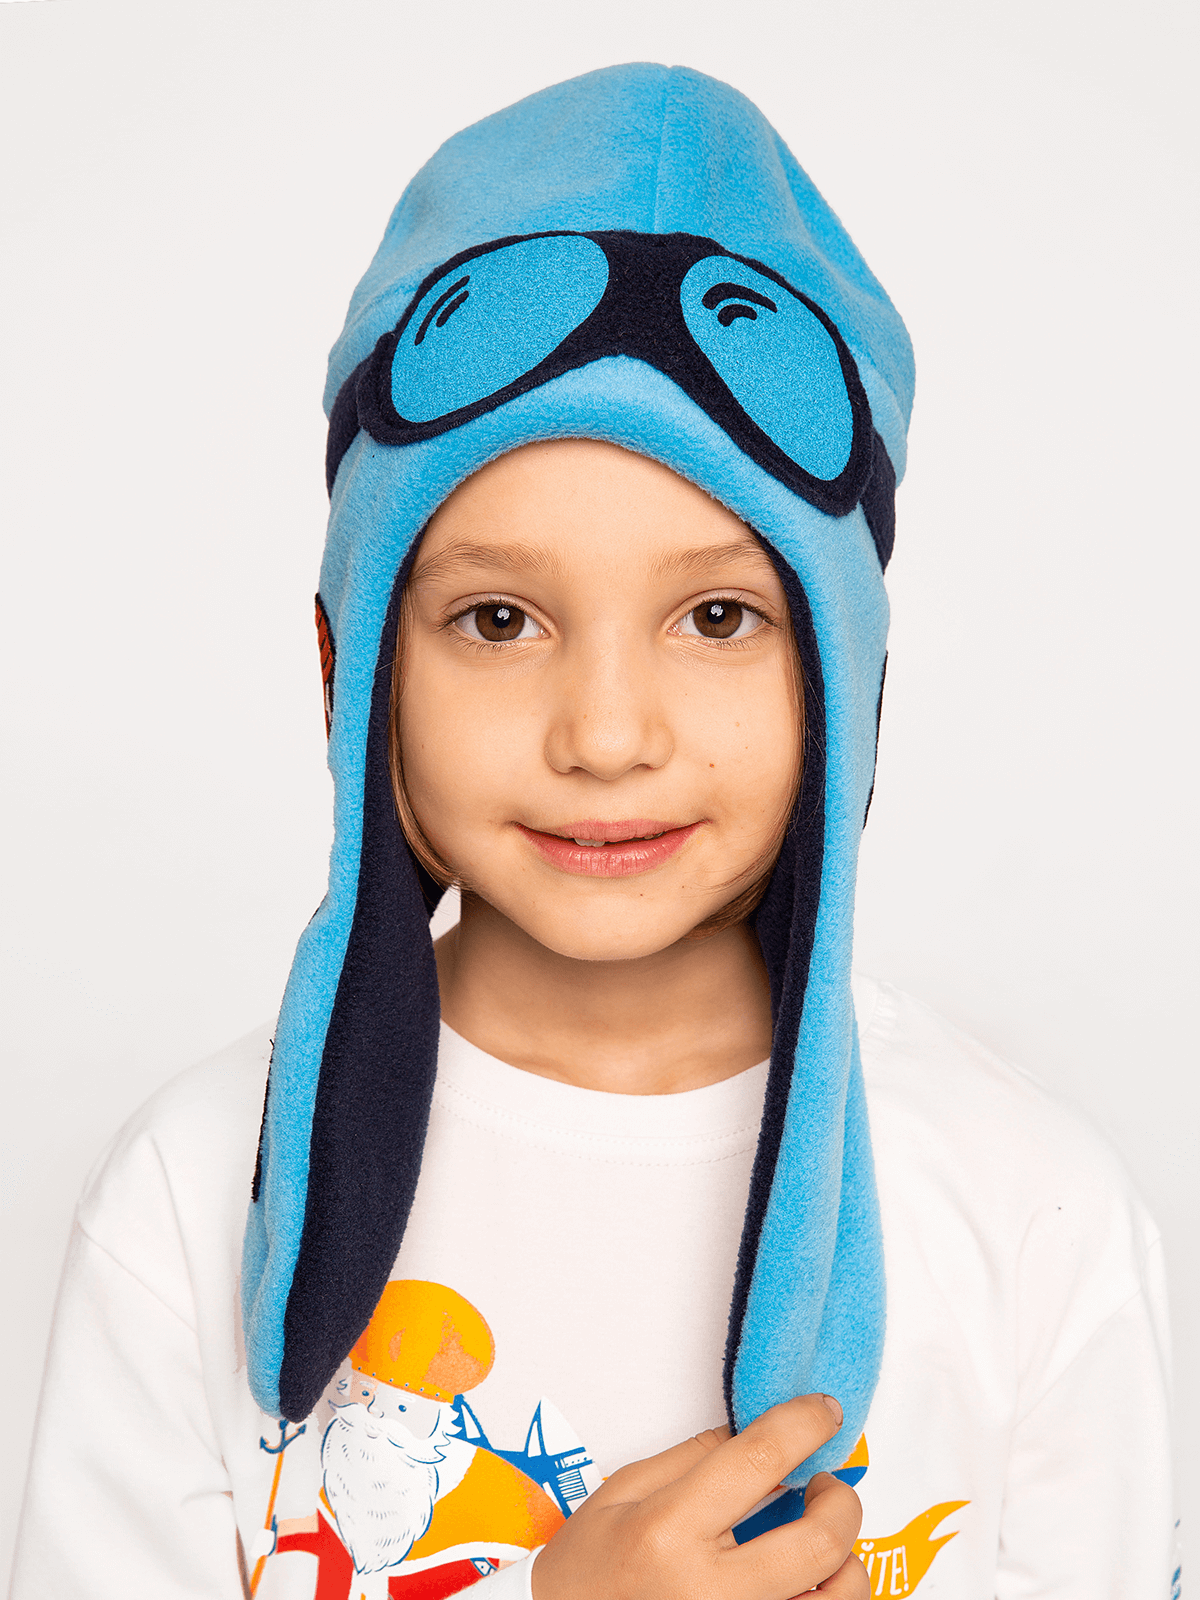 Kids Hat Pilot. Color sky blue. Hat: unisex, well suited for both boys and girls.